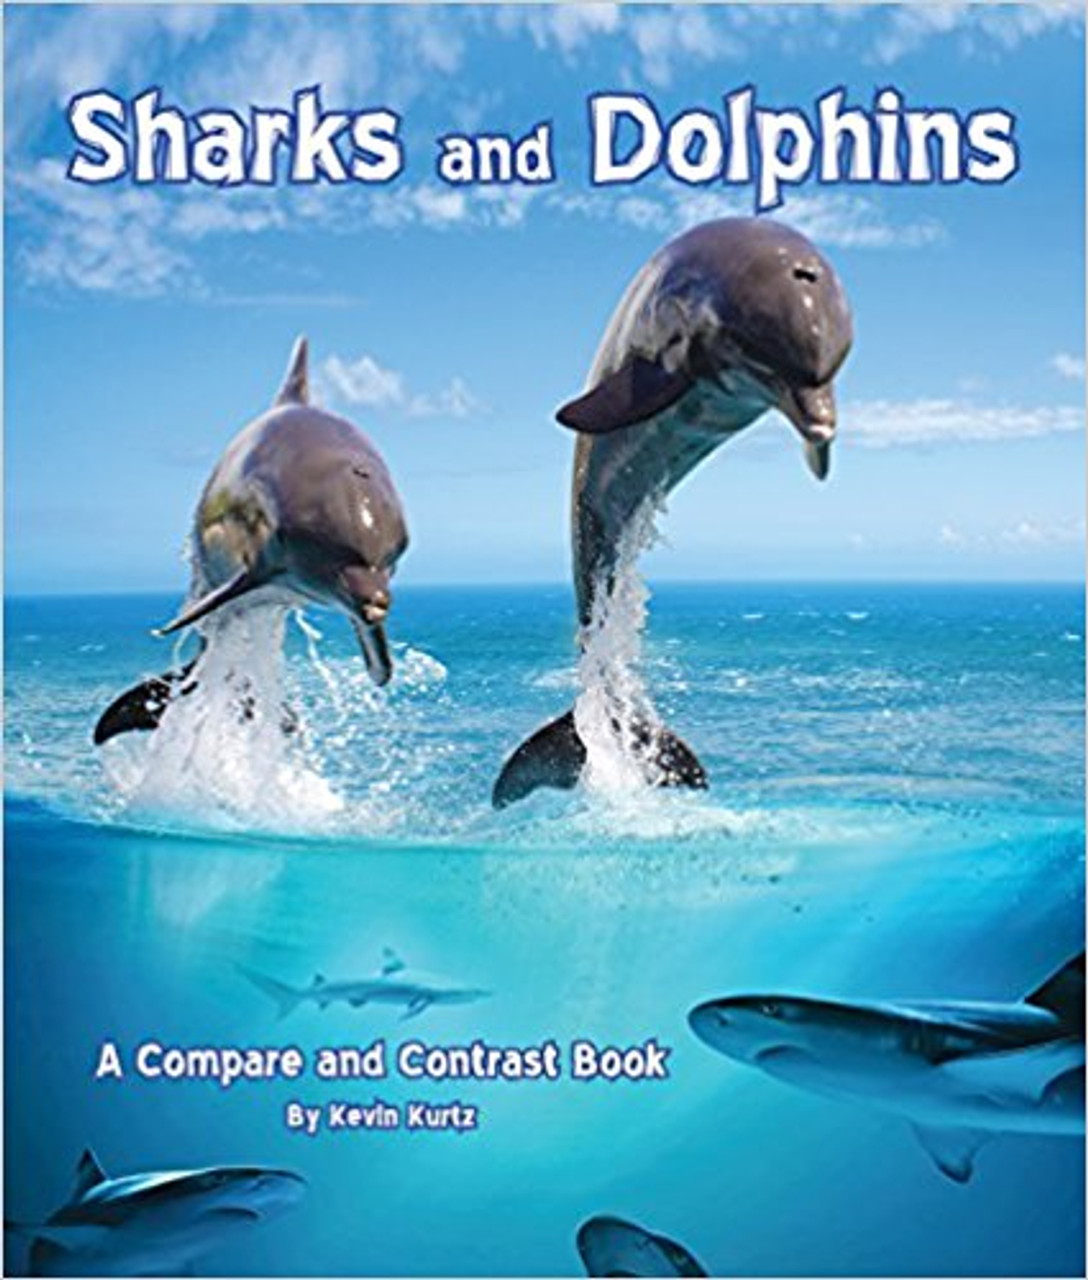 "Sharks and dolphins both have torpedo-shaped bodies with fins on their backs. They slice through the water to grab their prey with sharp teeth. But, despite their similarities, sharks and dolphins belong to different animal classes: one is a fish and gets oxygen from the water and the other is a mammal and gets oxygen from the air.  Marine educator Kevin Kurtz guides early readers to compare and contrast these ocean predators through stunning photographs and simple, nonfiction text."